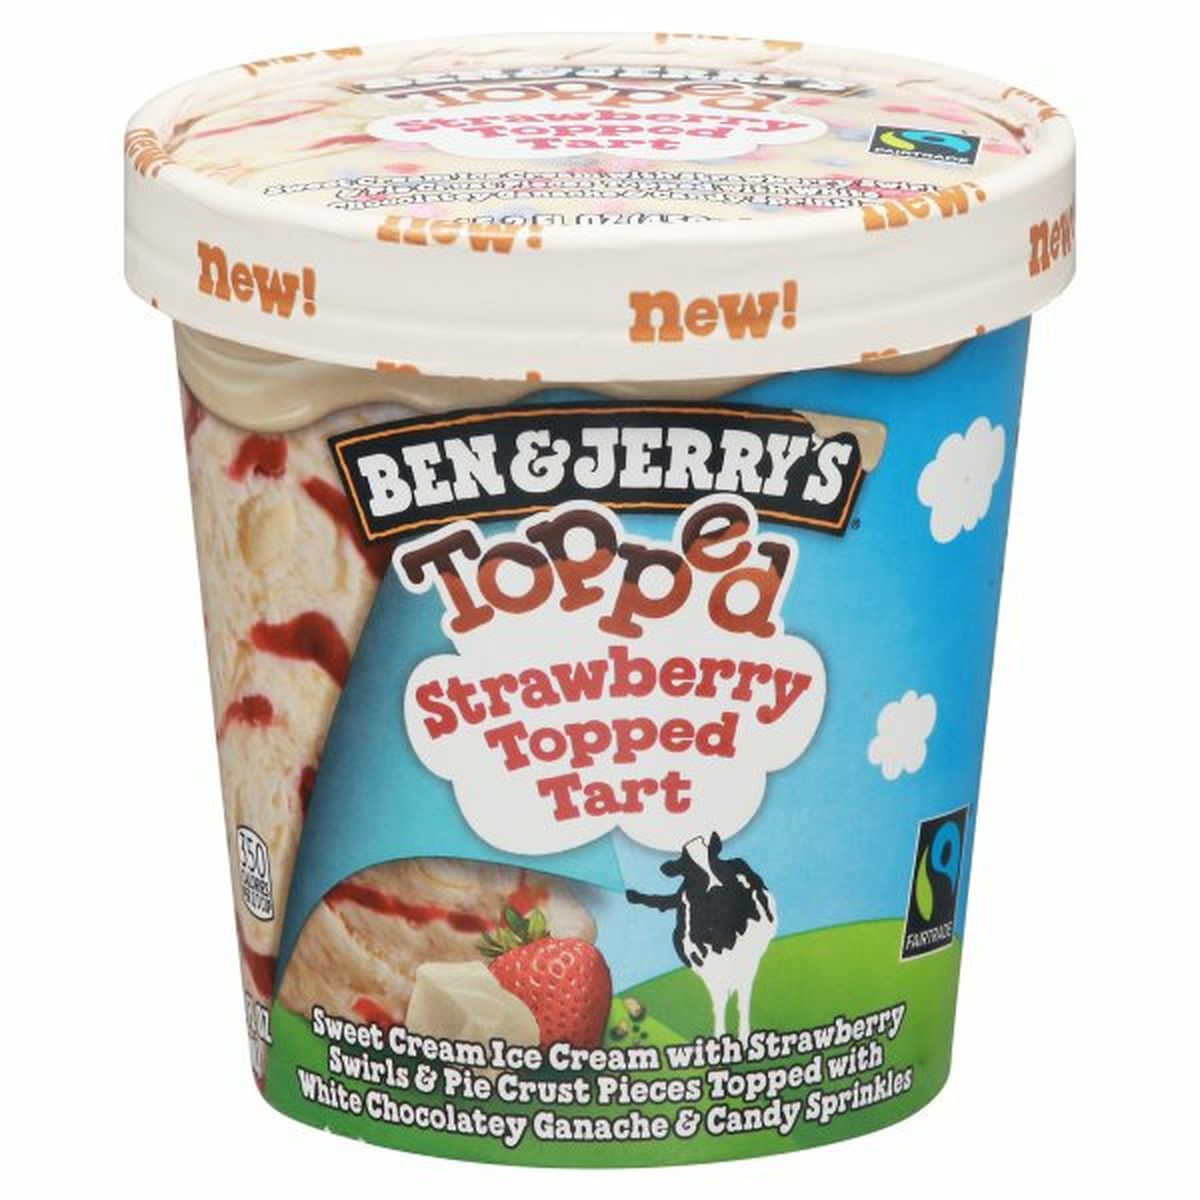 Calories in Ben & Jerry's Ice Cream, Strawberry Topped Tart, Topped